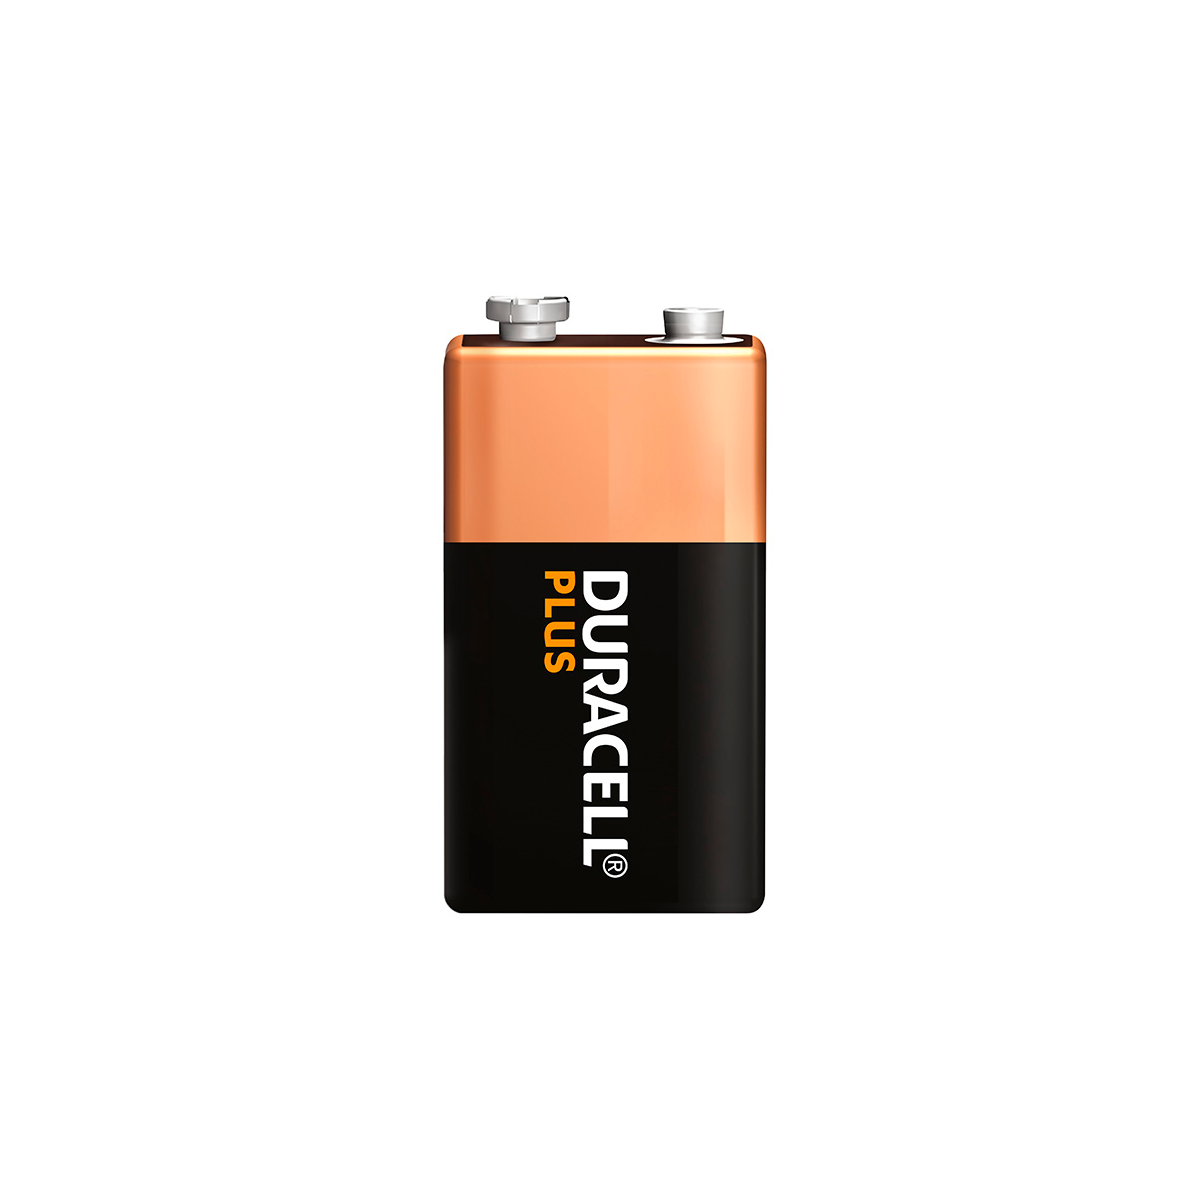 Bateria Duracell 9V Blister x 1 unidad - Well Company